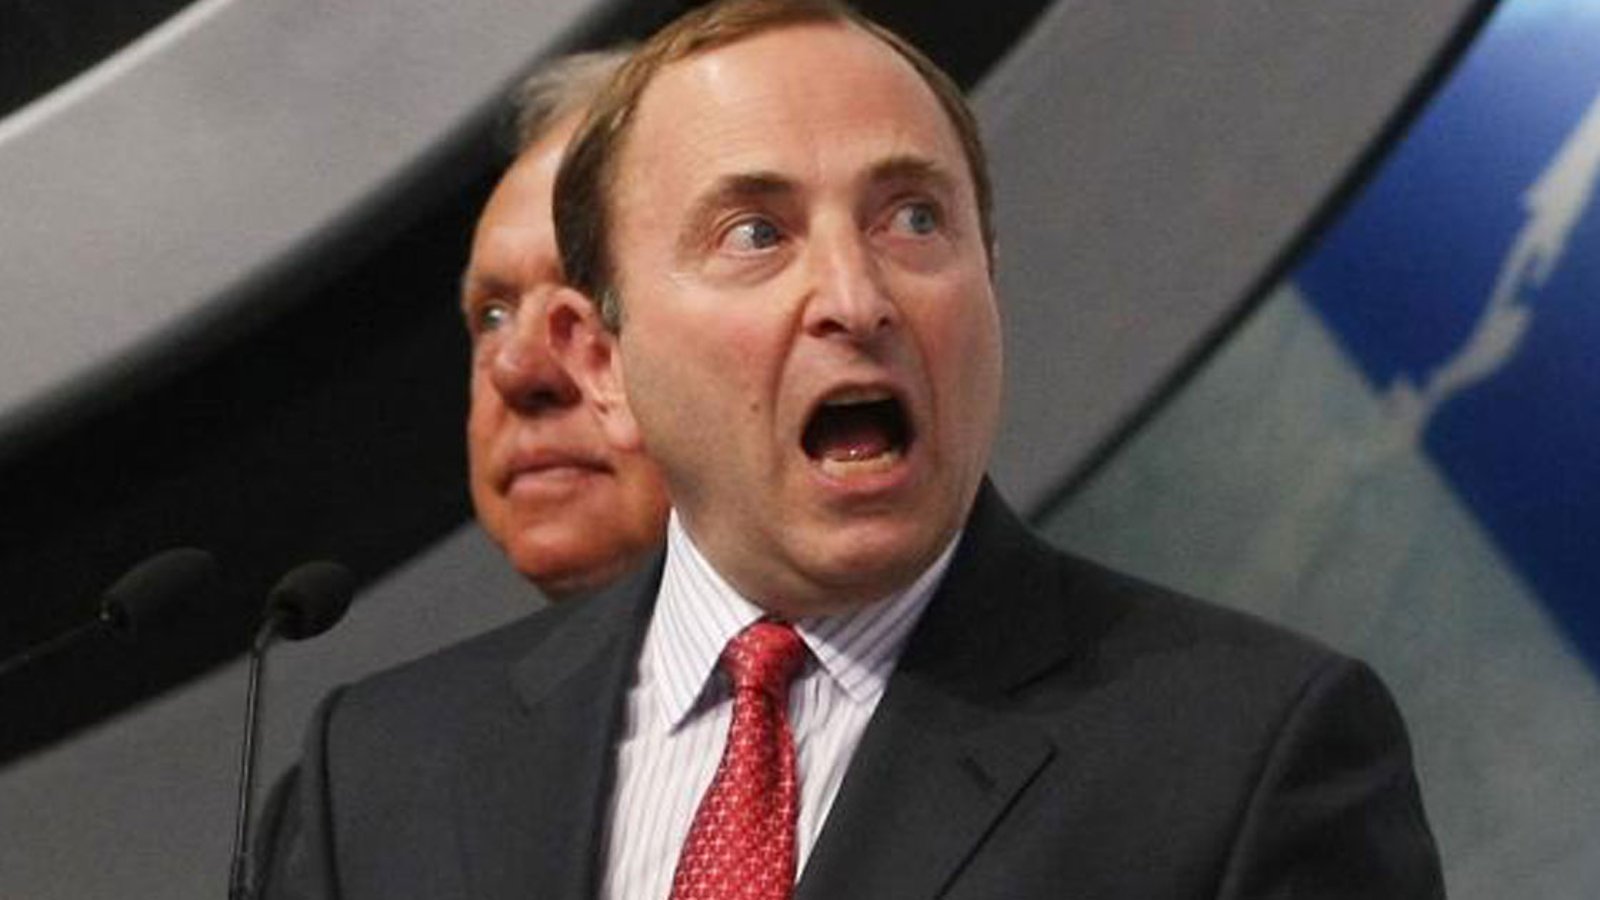 Breaking: NHL agent rips Bettman and the league on social media 